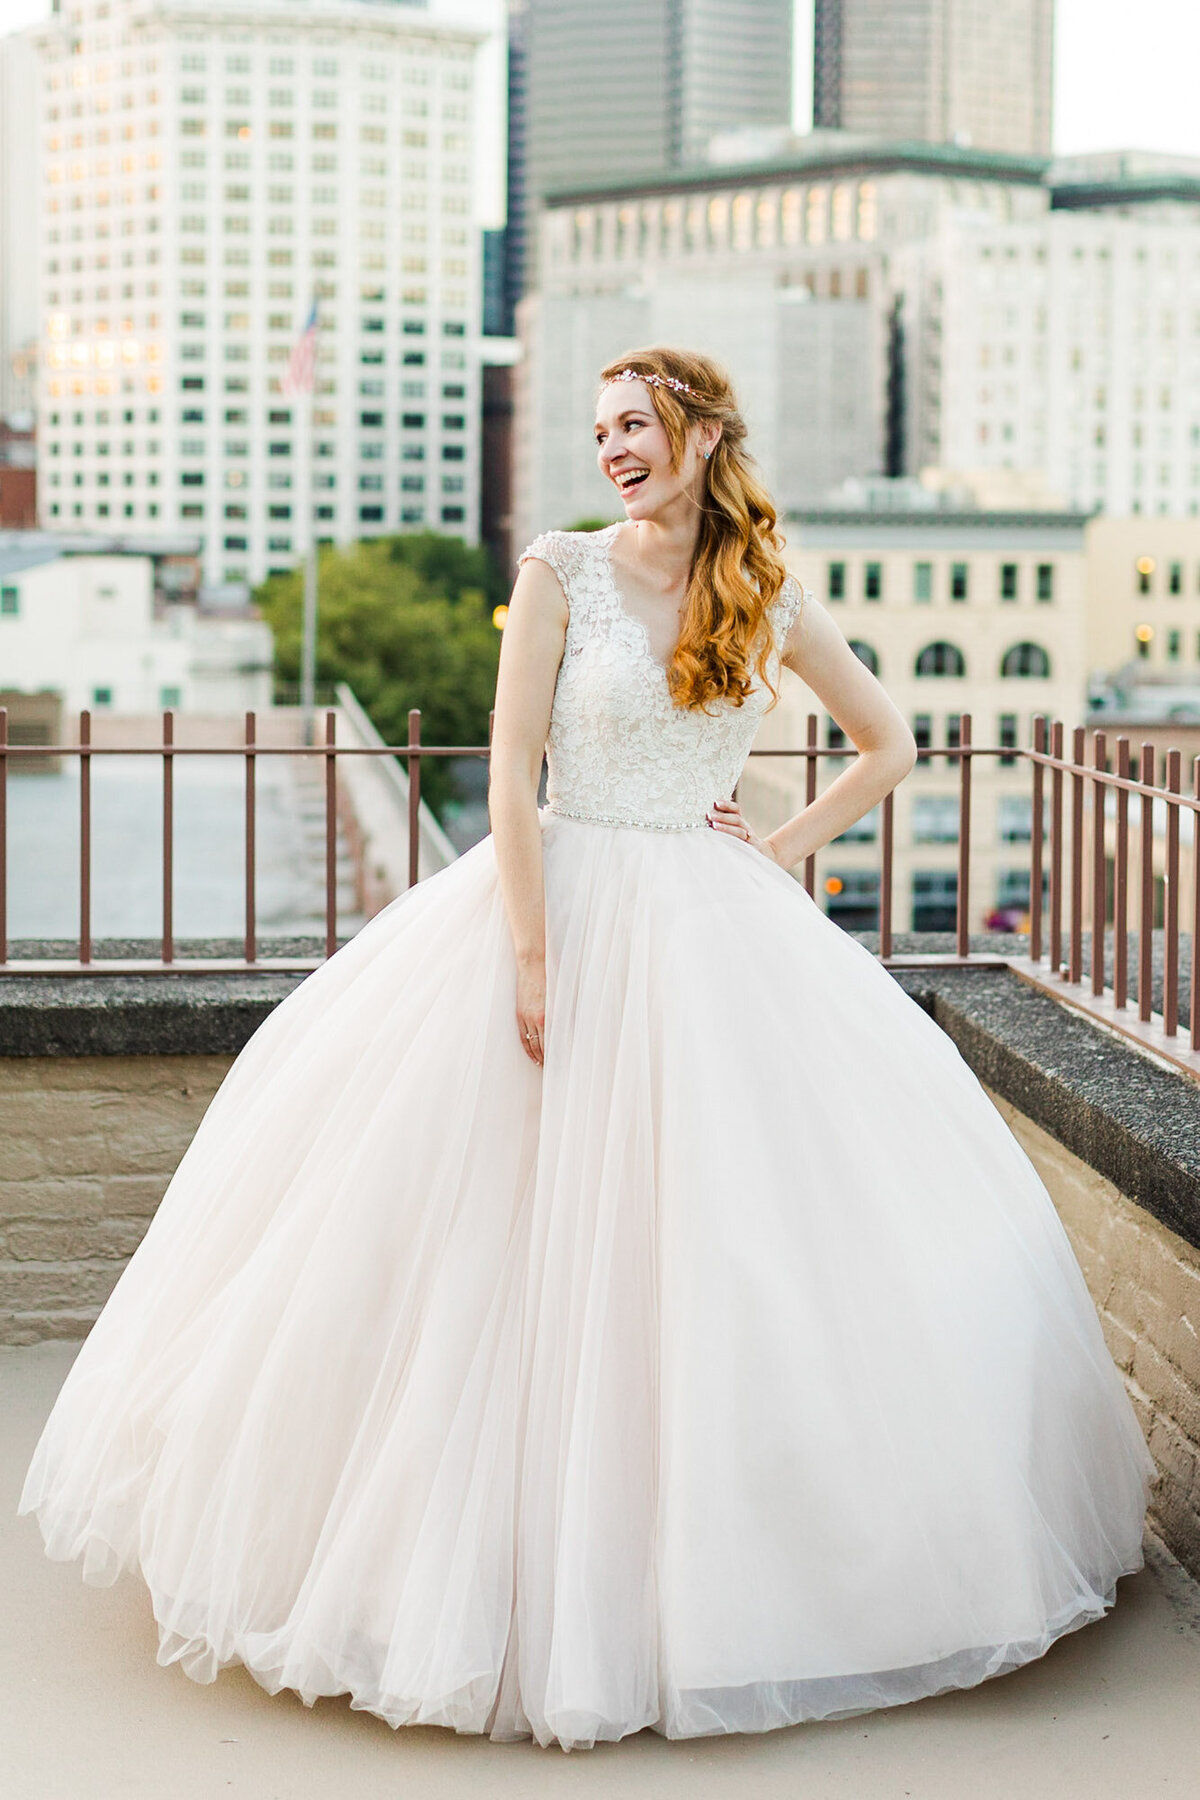 Bride-laughing-in-princess-ballgown-wedding-dress-on-Seattle-urban-rooftop-at-Pioneer-Square-photo-by-Joanna-Monger-Photography